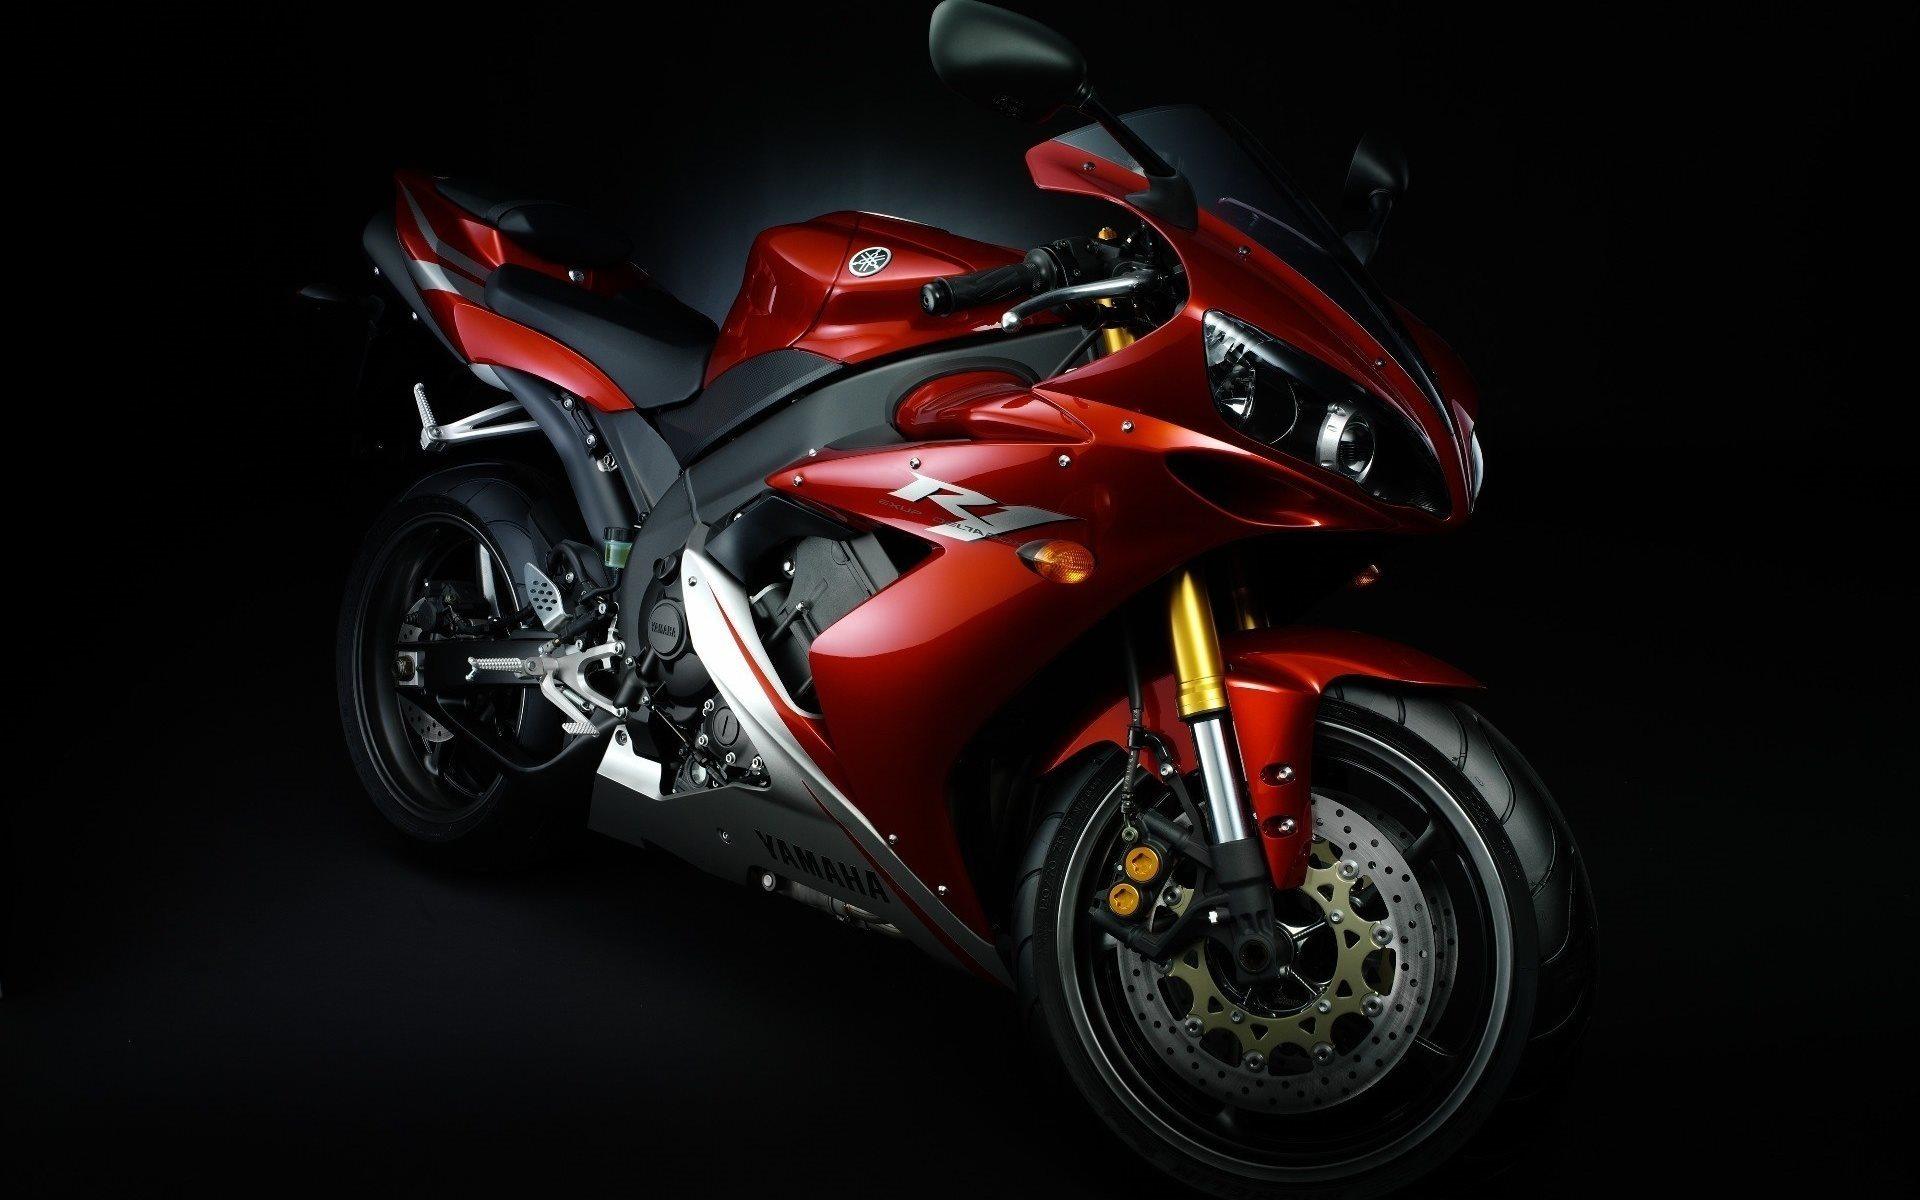 FFWallpaper  Yamaha Yzf R1 Collection See All Wallpapers   httpsffwallpapercomyamahayzfr1html wallpapers background  motorcycle  Facebook